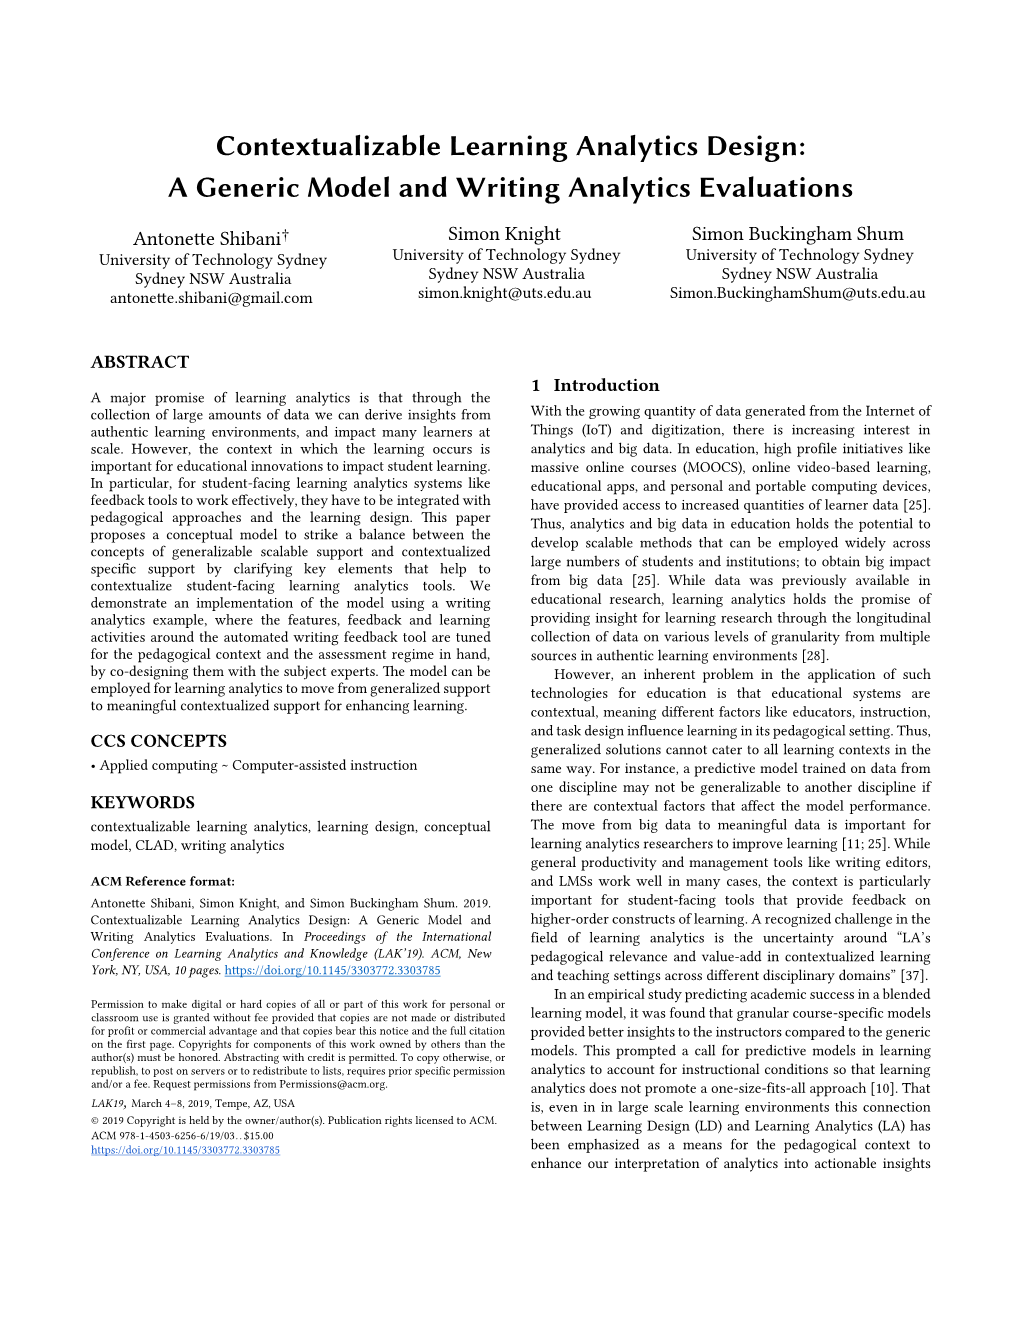 Contextualizable Learning Analytics Design: a Generic Model and Writing Analytics Evaluations